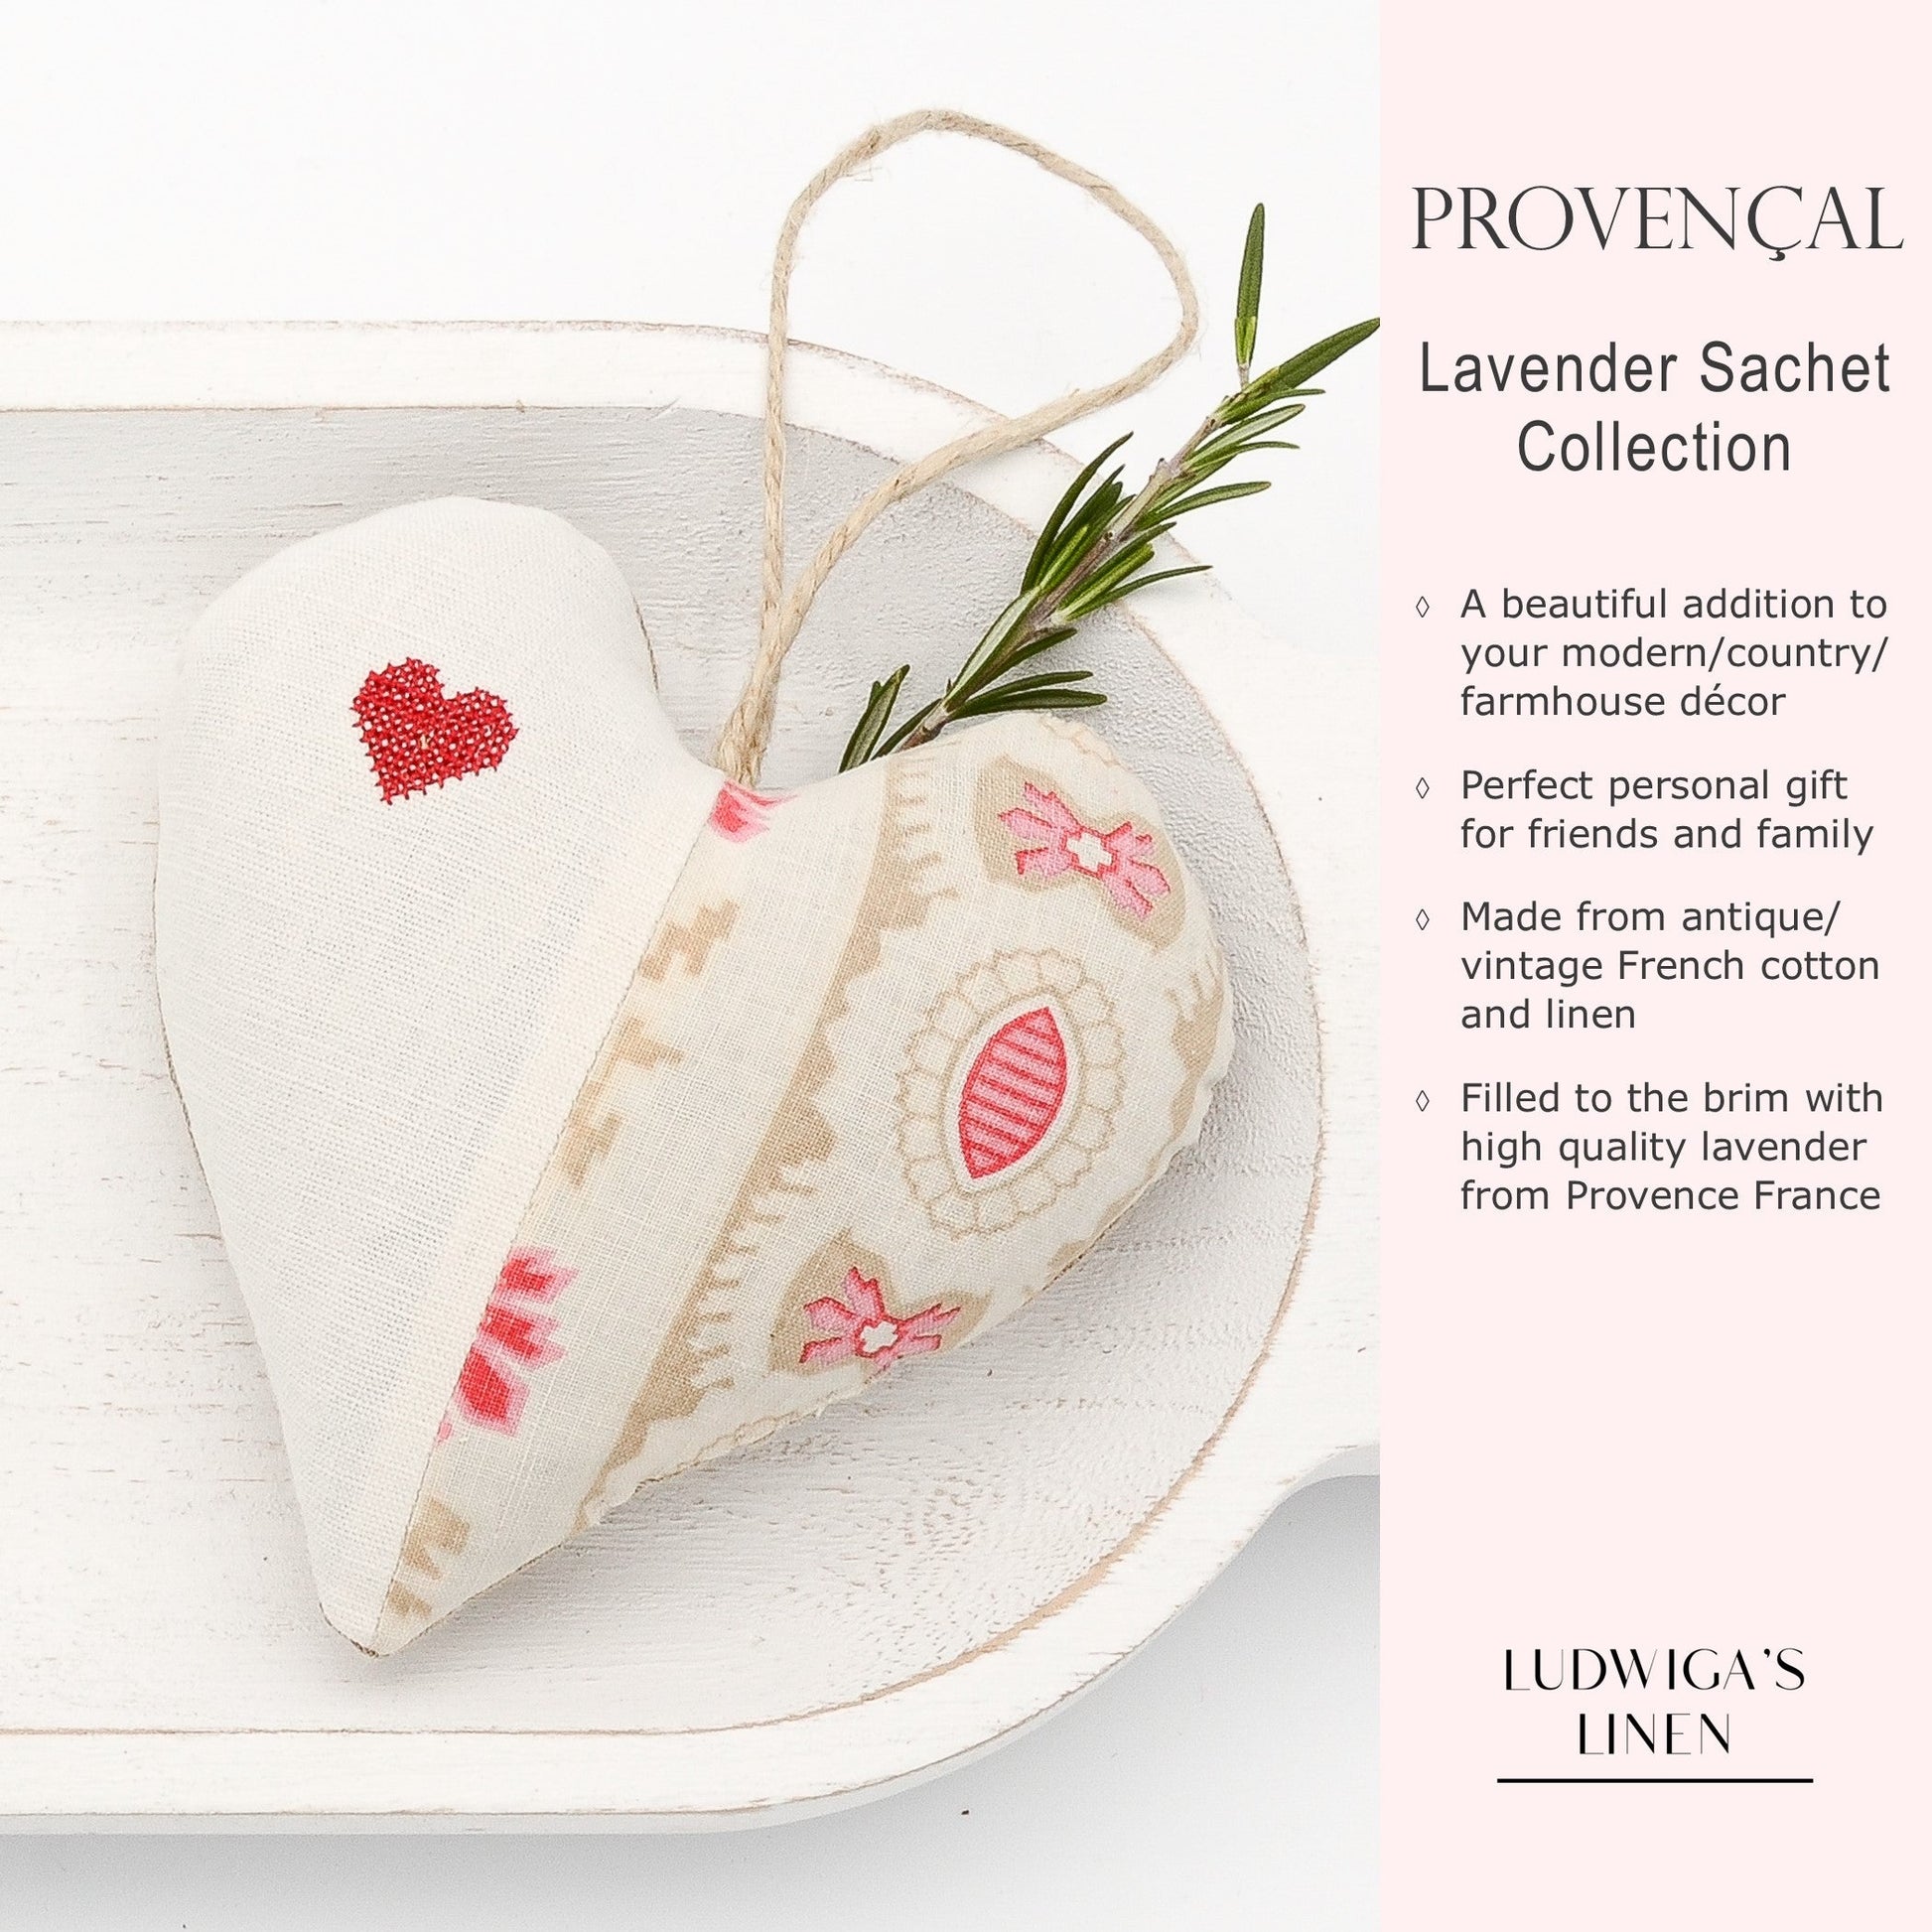 Antique/vintage French cotton and European white linen lavender sachet heart with red embroidered heart, hemp twine tie and filled with high quality lavender from Provence France